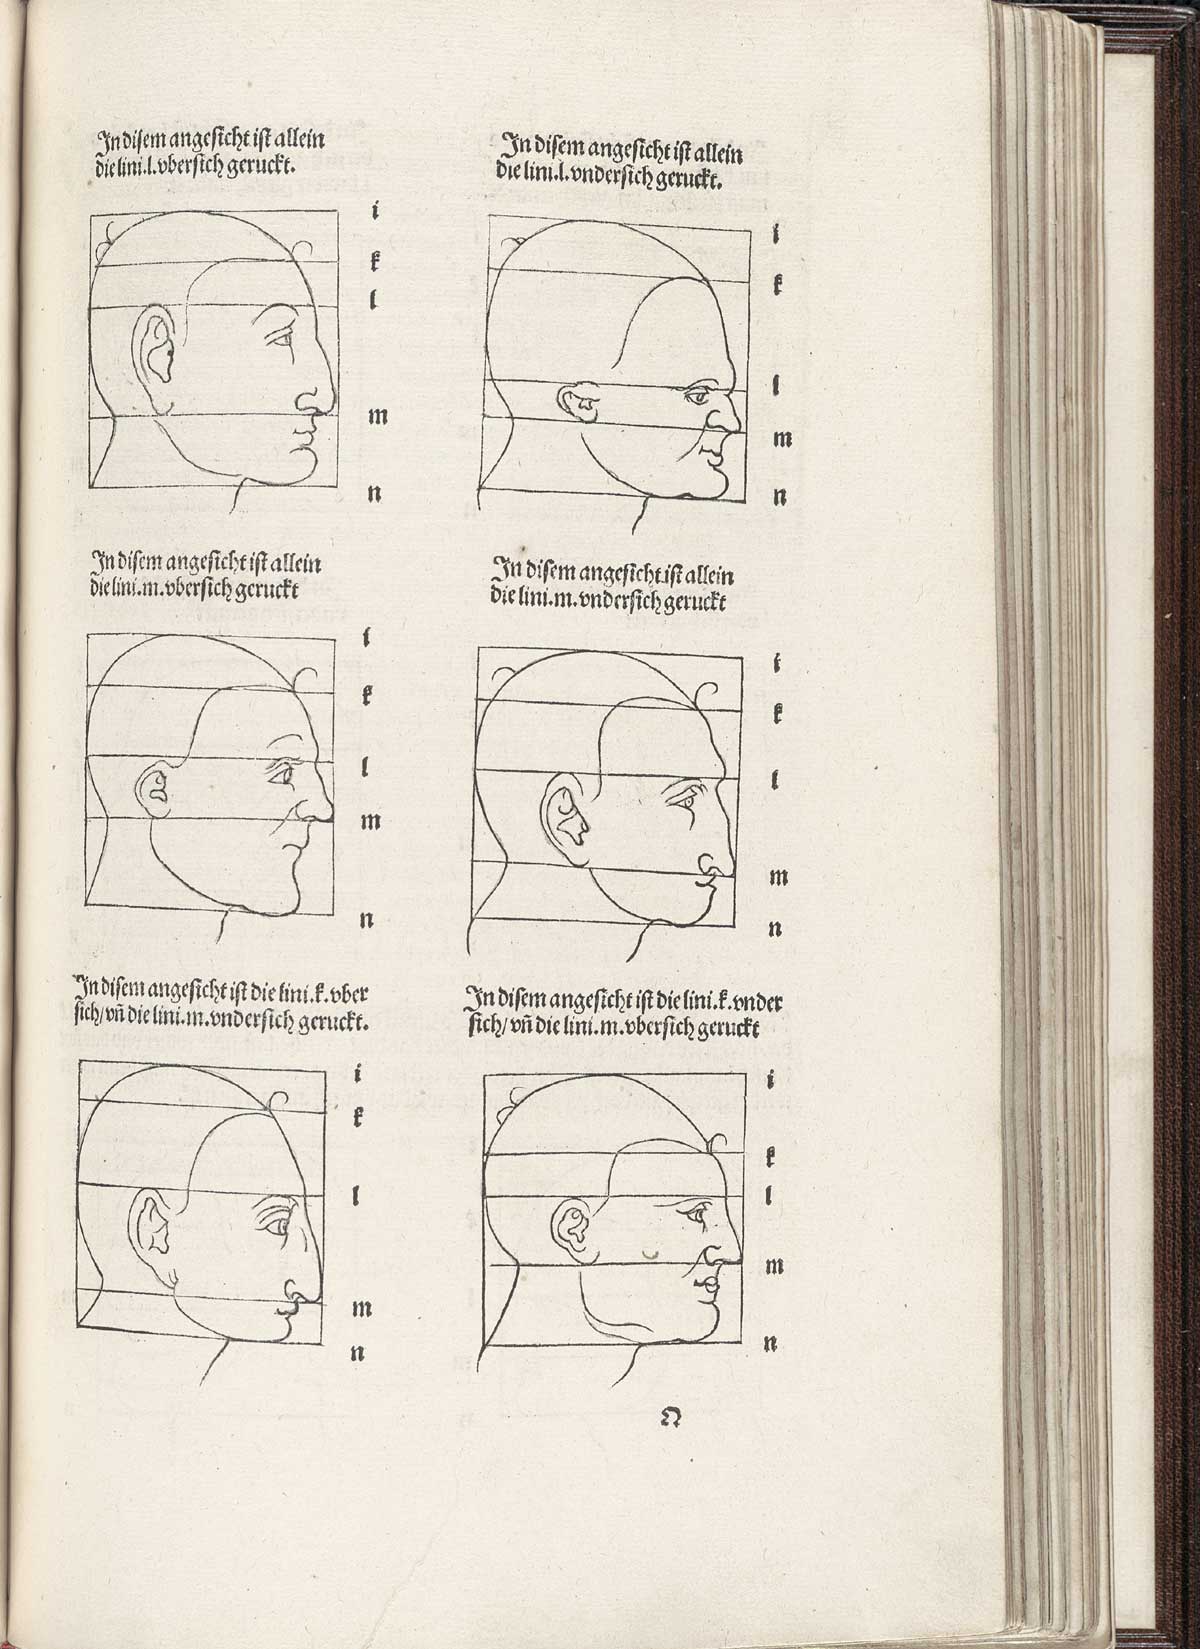 Woodcut of six heads in profile, all facing to the left, with different facial proportions such as larger or smaller noses or more or less protruding brows, with lines cutting across the faces showing proportions of different distances, such as from top of eyelid to bottom of nose; from Albrecht Dürer’s Vier Bücher von menschlicher Proportion, NLM Call no. WZ 240 D853v 1528.